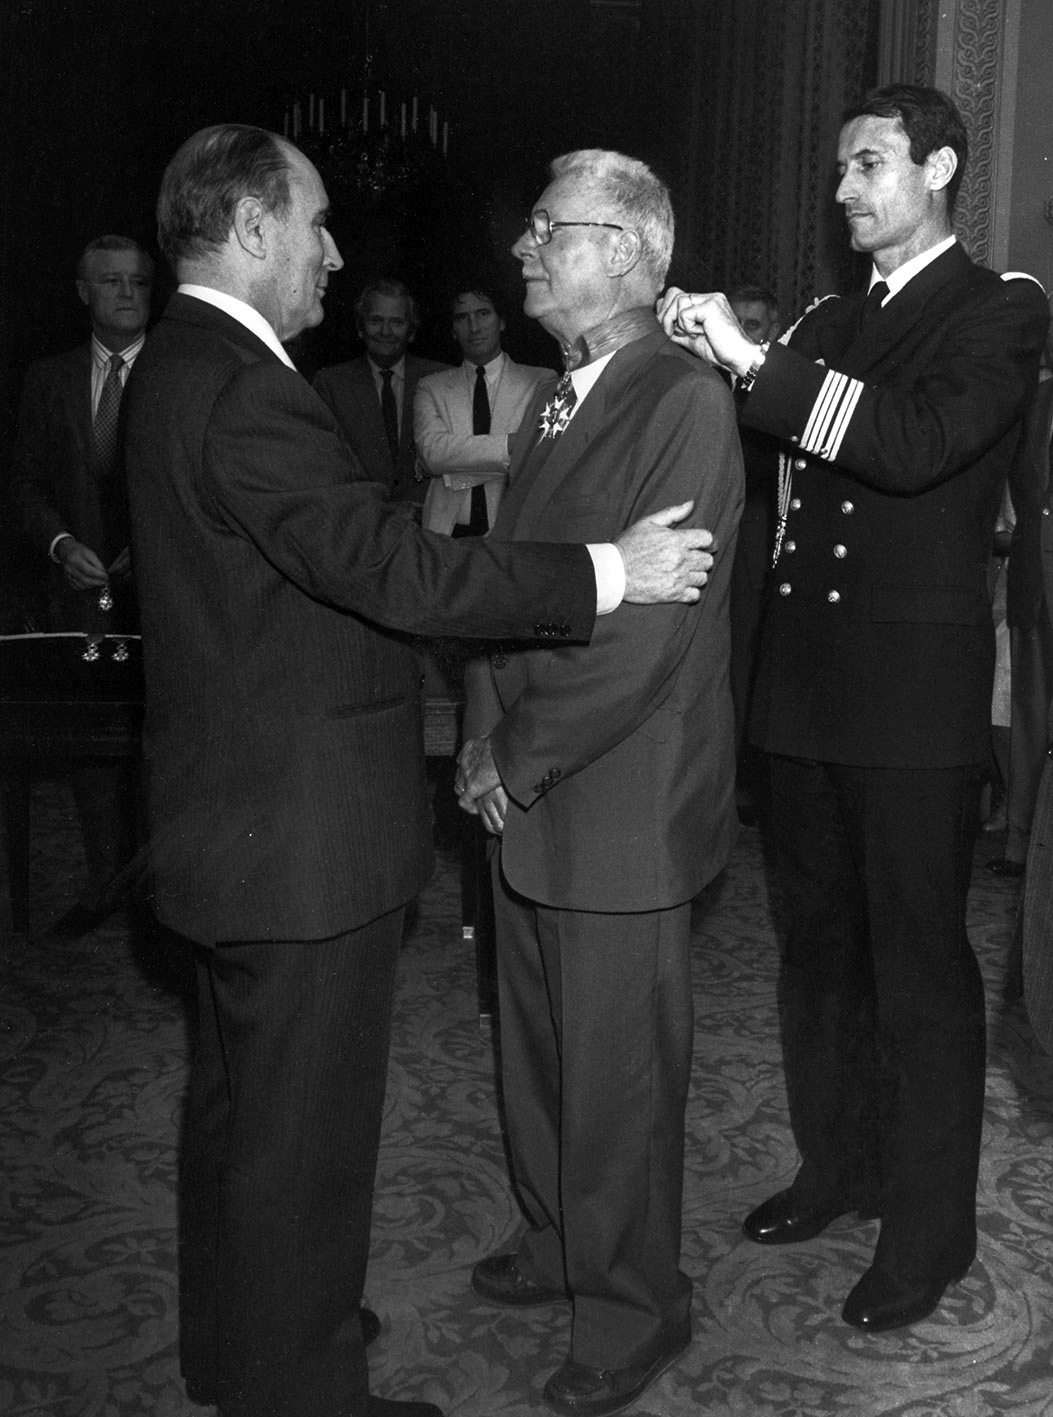 Jean Prouvé receiving the Grand Cross of Commander of the Legion of Honor from President François Mitterrand, Paris, 1982.